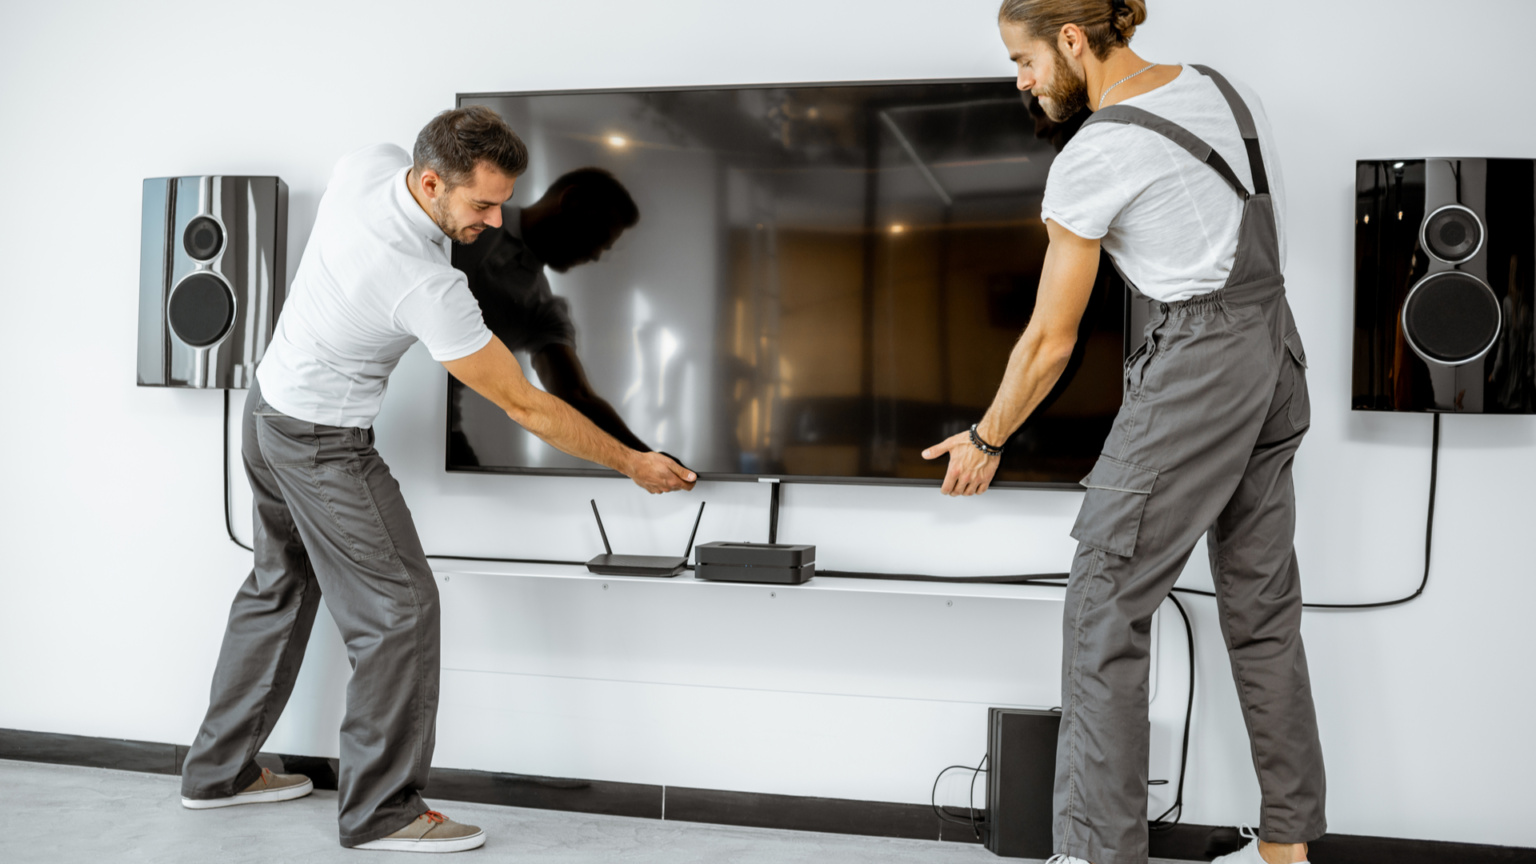 5 Tips and Tricks to Mounting your TV Well